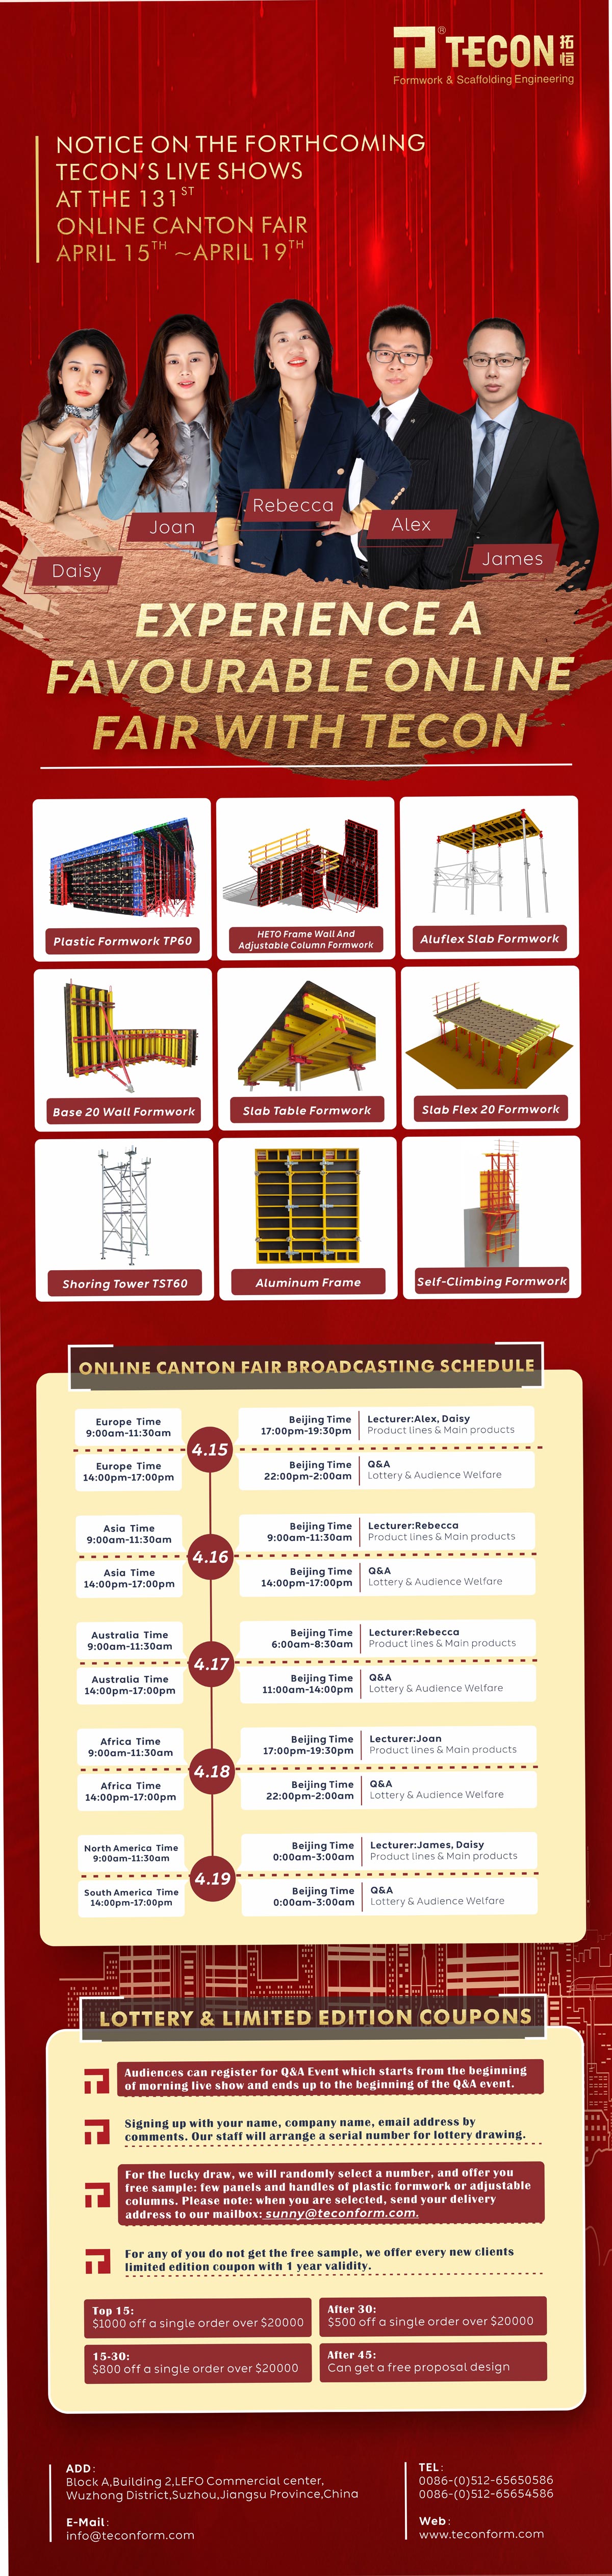 Welcome-to-Tecons-Live-Shows-in-the-131st-Online-Canton-Fair.jpg